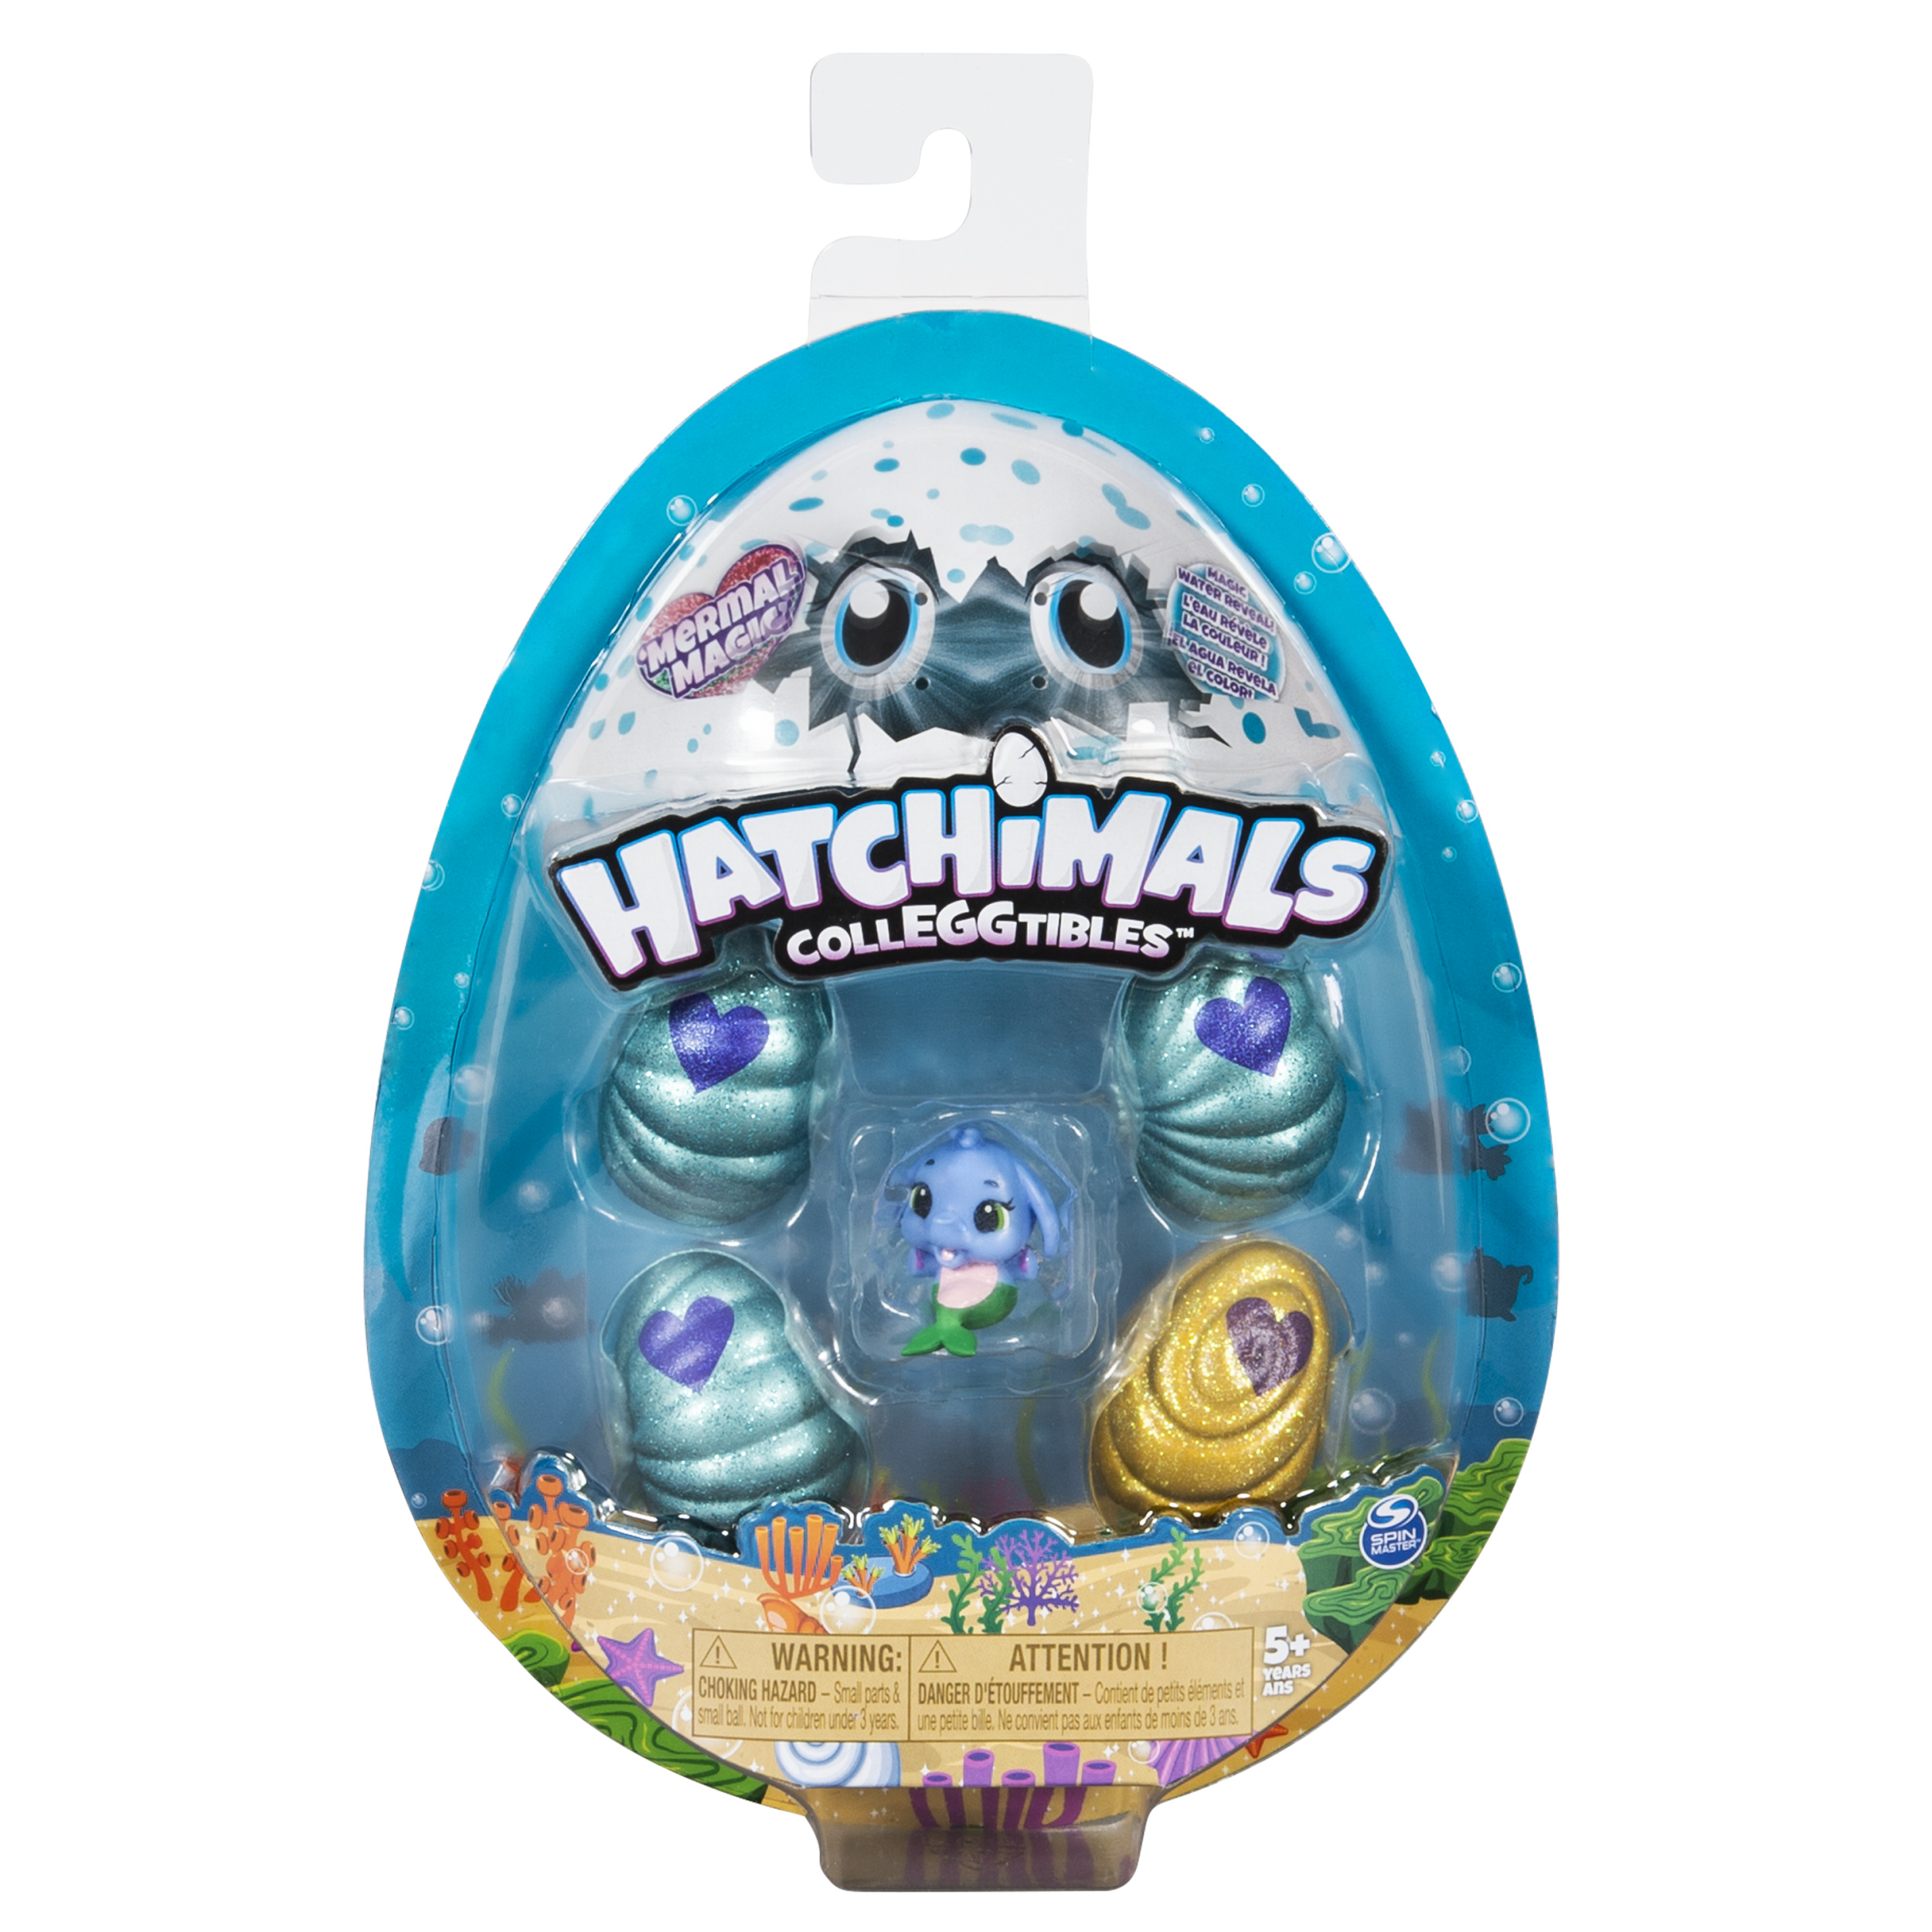 Hatchimals CollEGGtibles, Mermal Magic 4 Pack + Bonus with Season 5 Hatchimals, for Kids Aged 5 and Up (Styles May Vary) - image 1 of 8